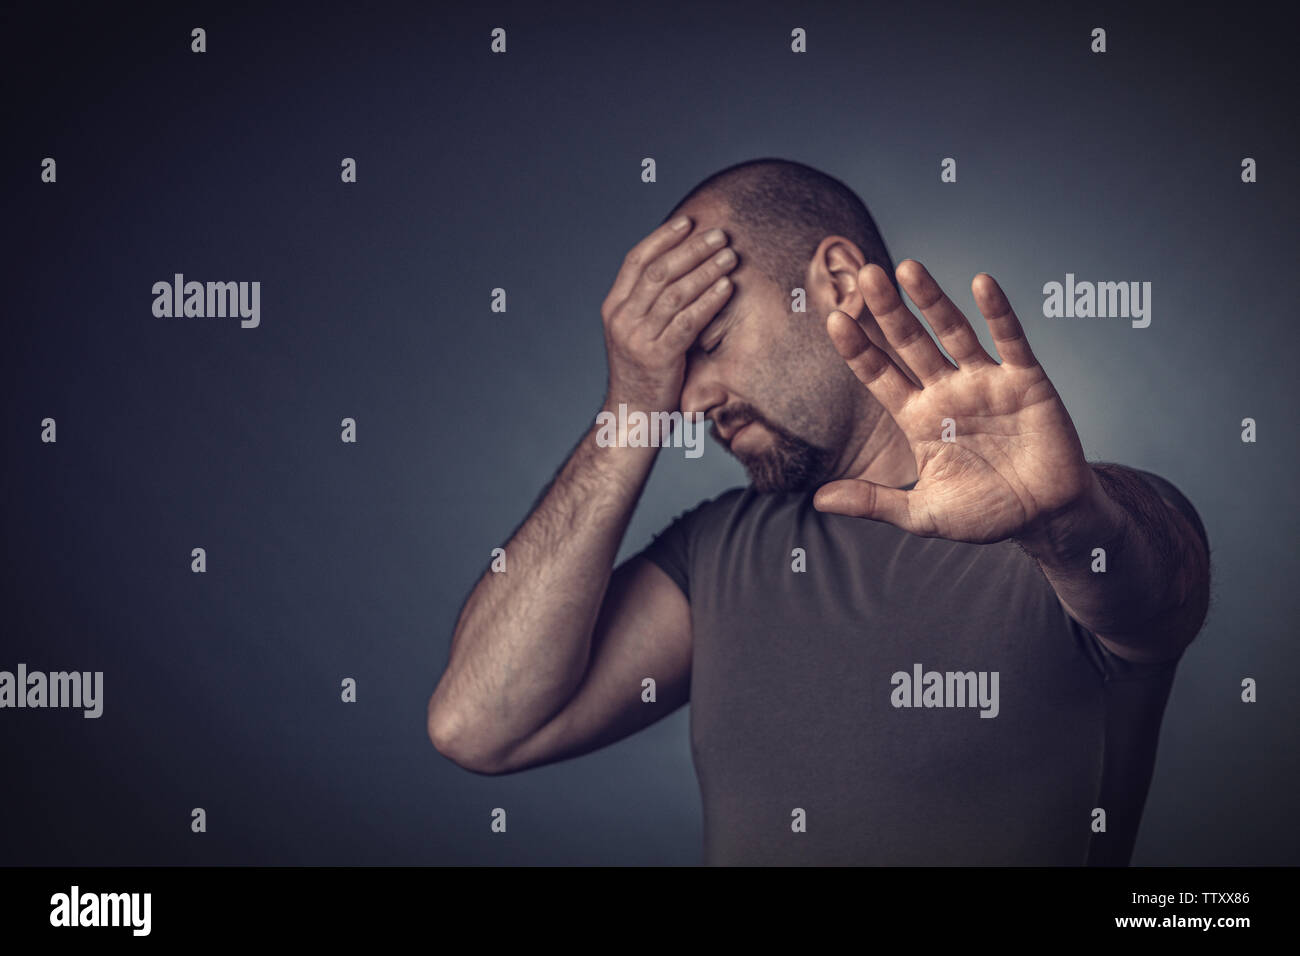 Portrait of a stressed man with his eyes closed and his hand on his forehead. gesture of those who keep people away. Stock Photo